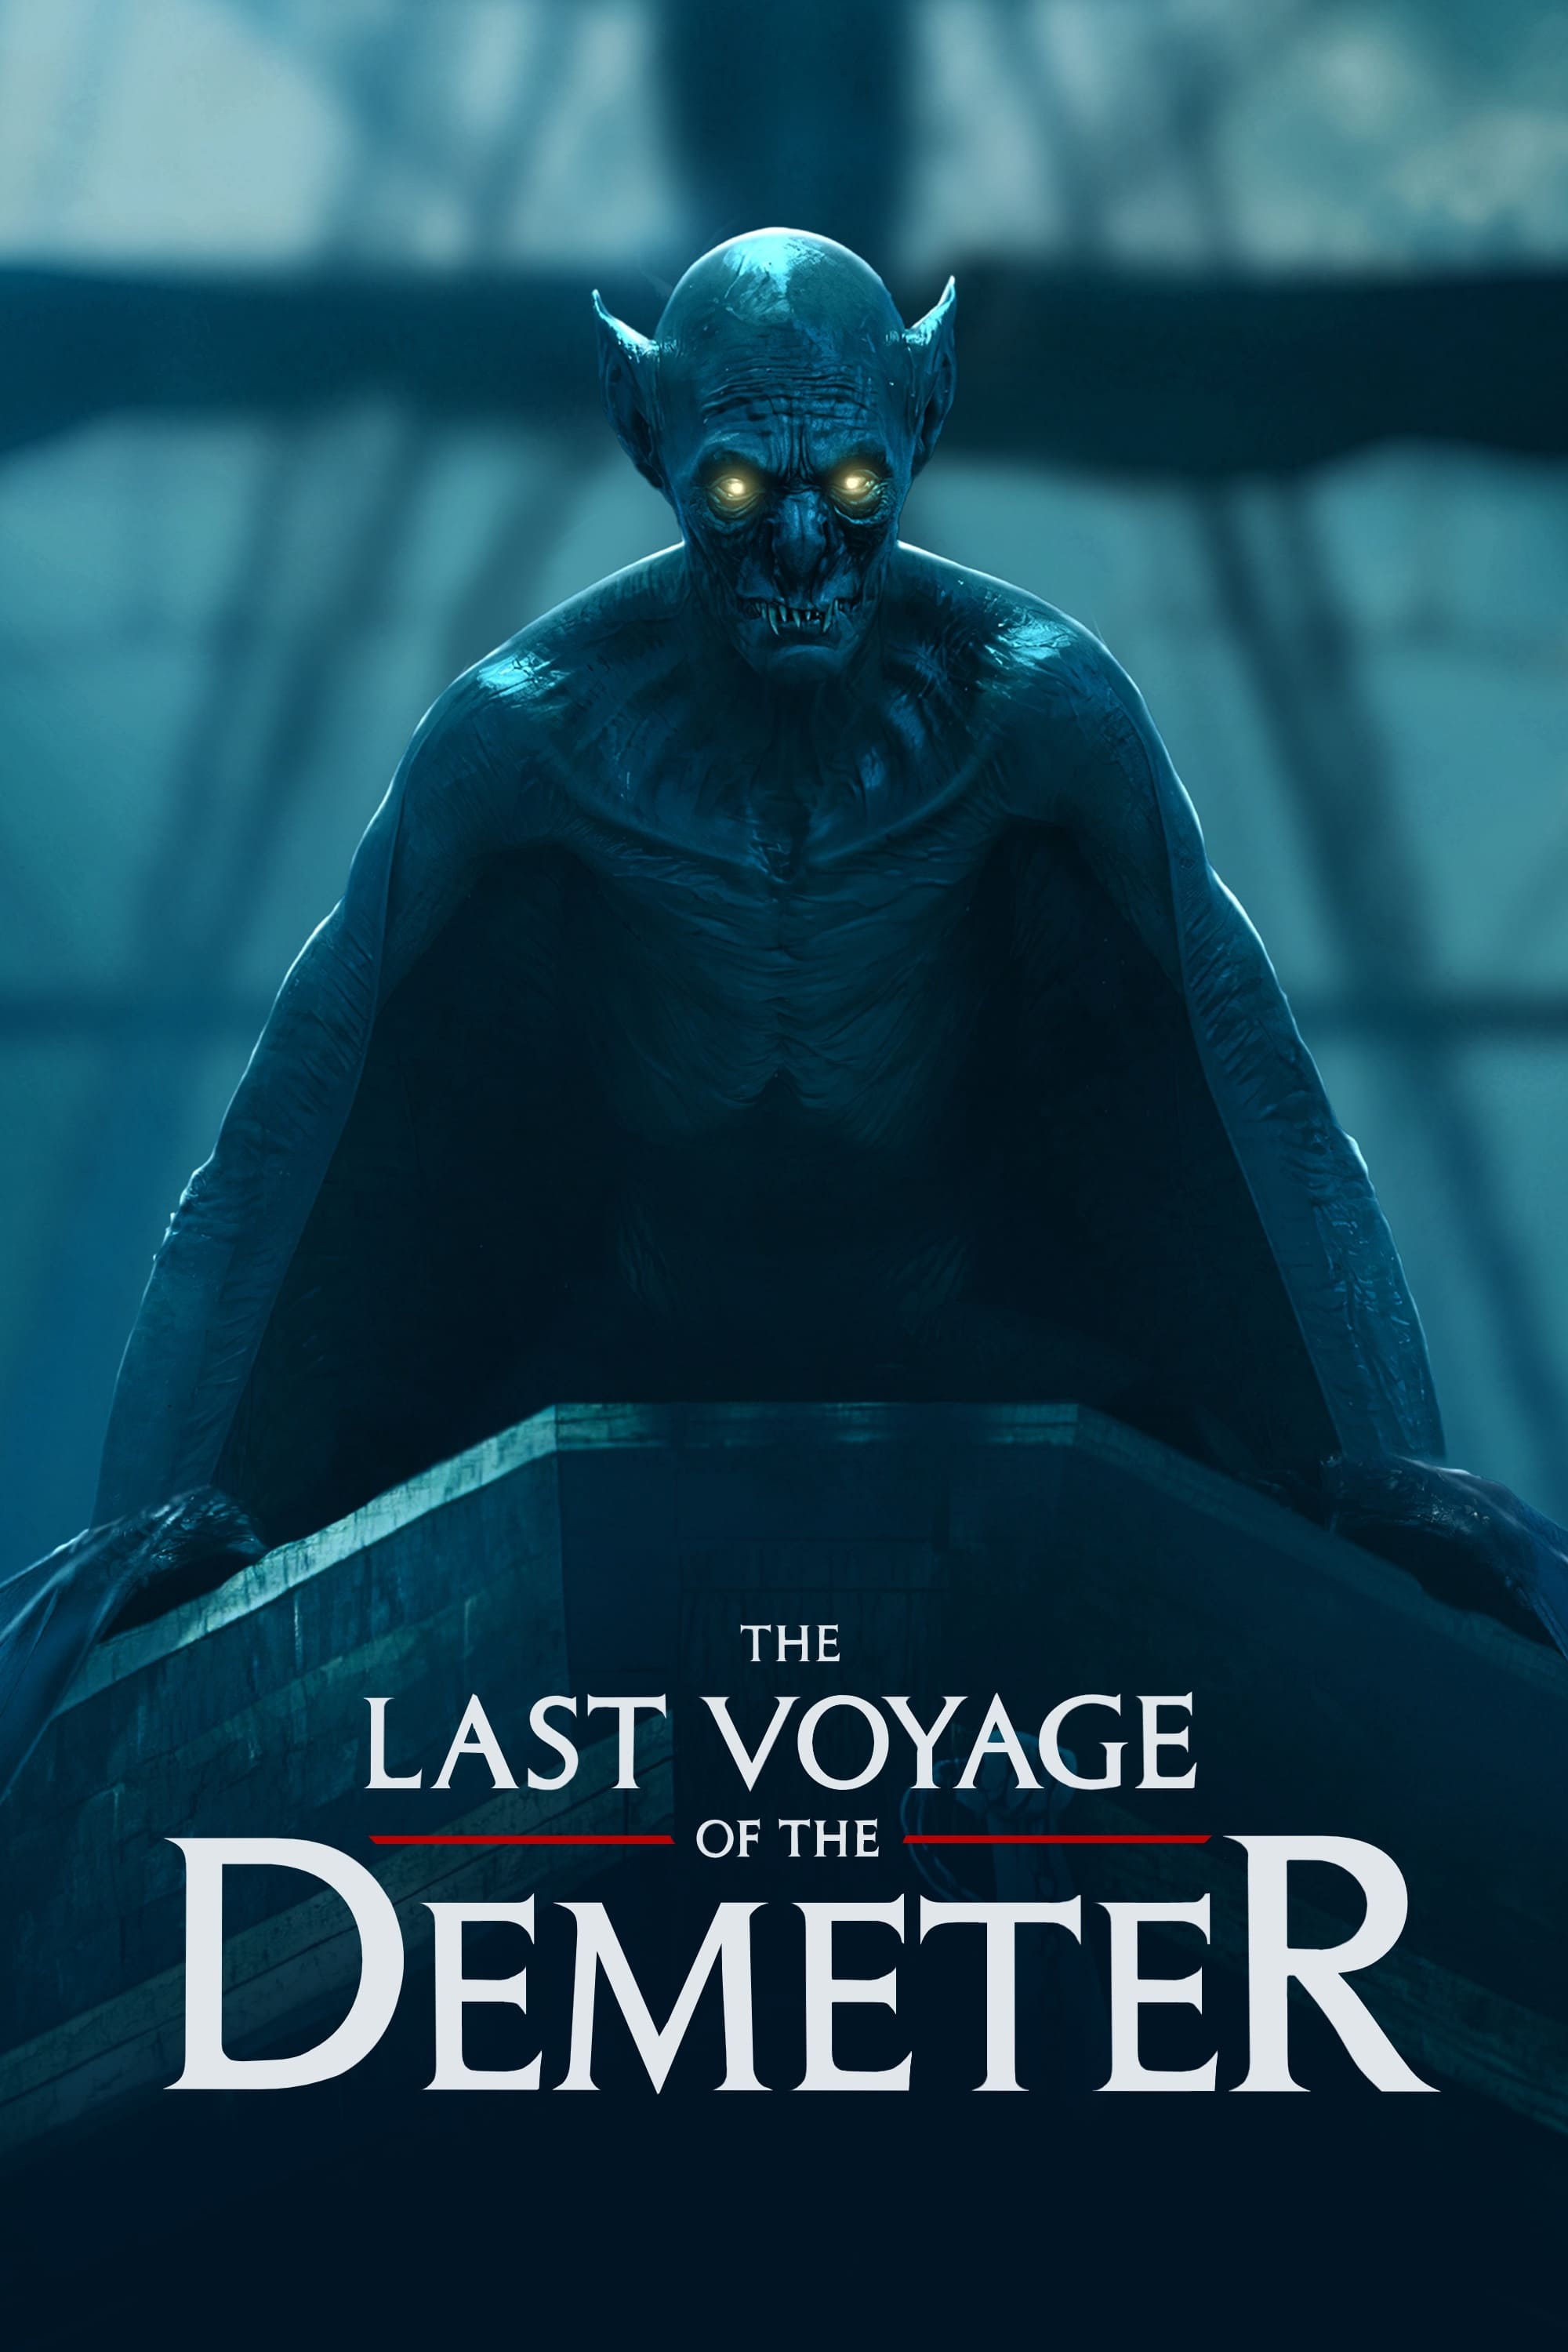 last voyage of the demeter showtimes